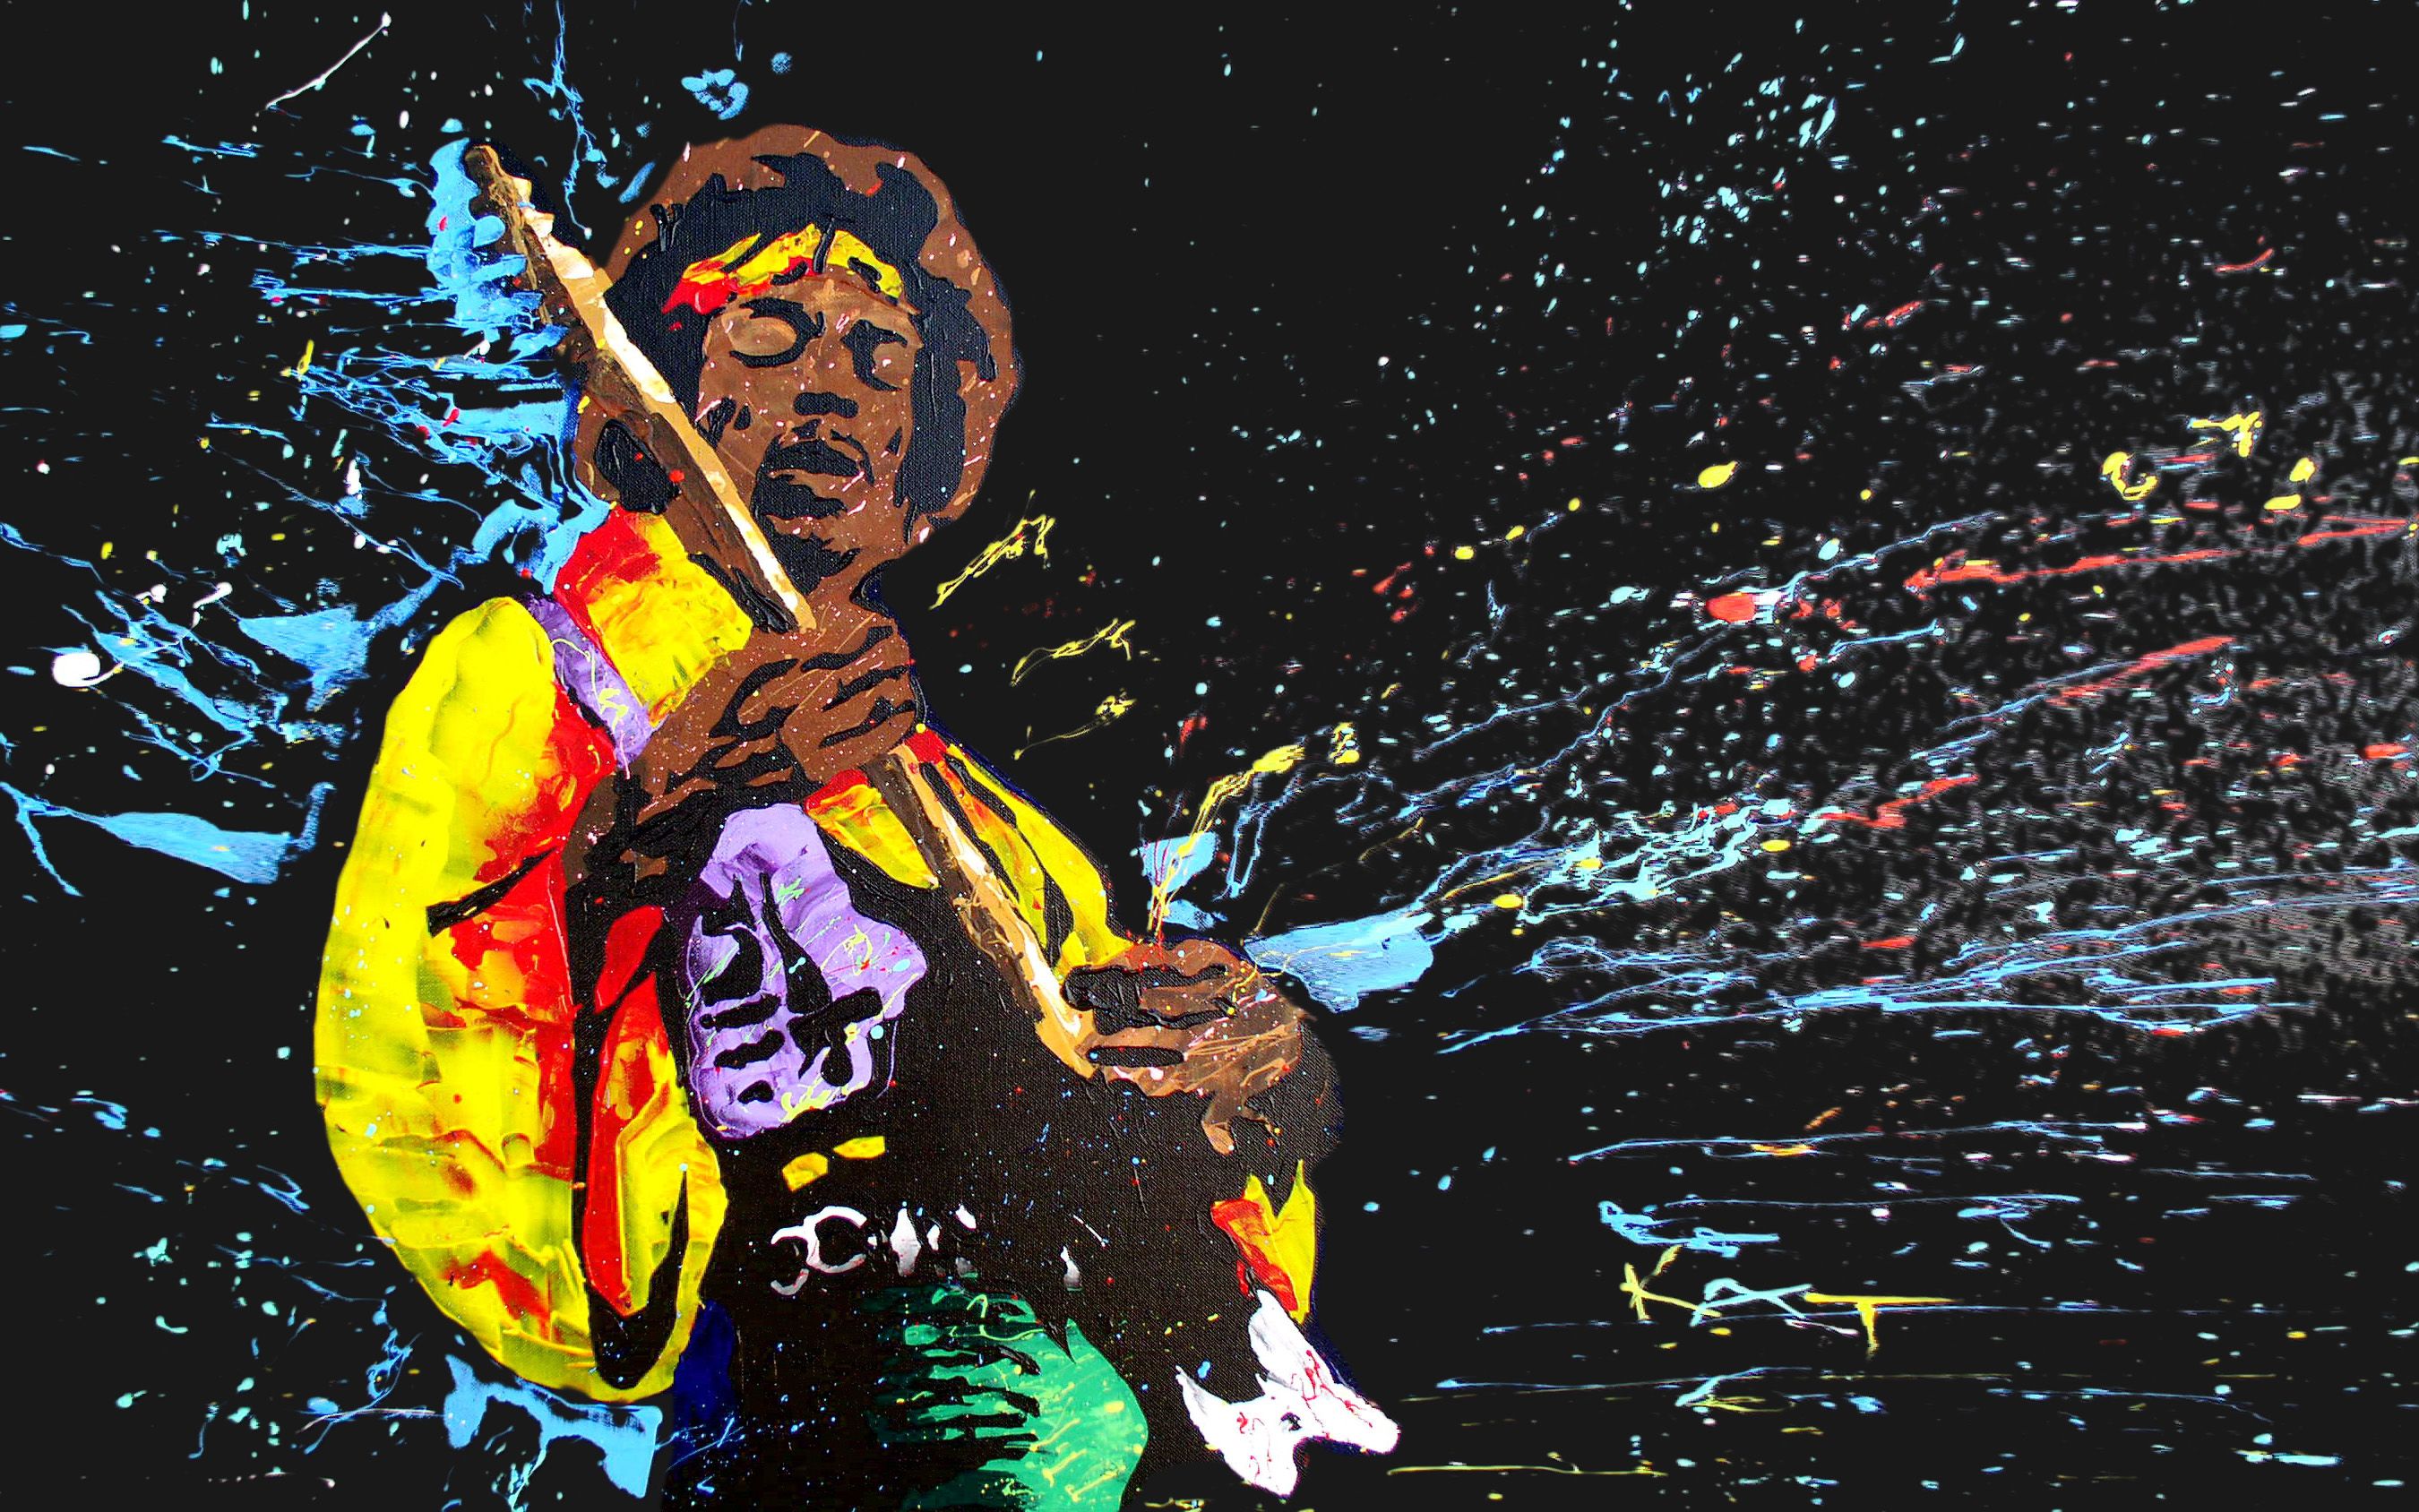 trippy images   Google Search Inspiration Jimi hendrix guitar